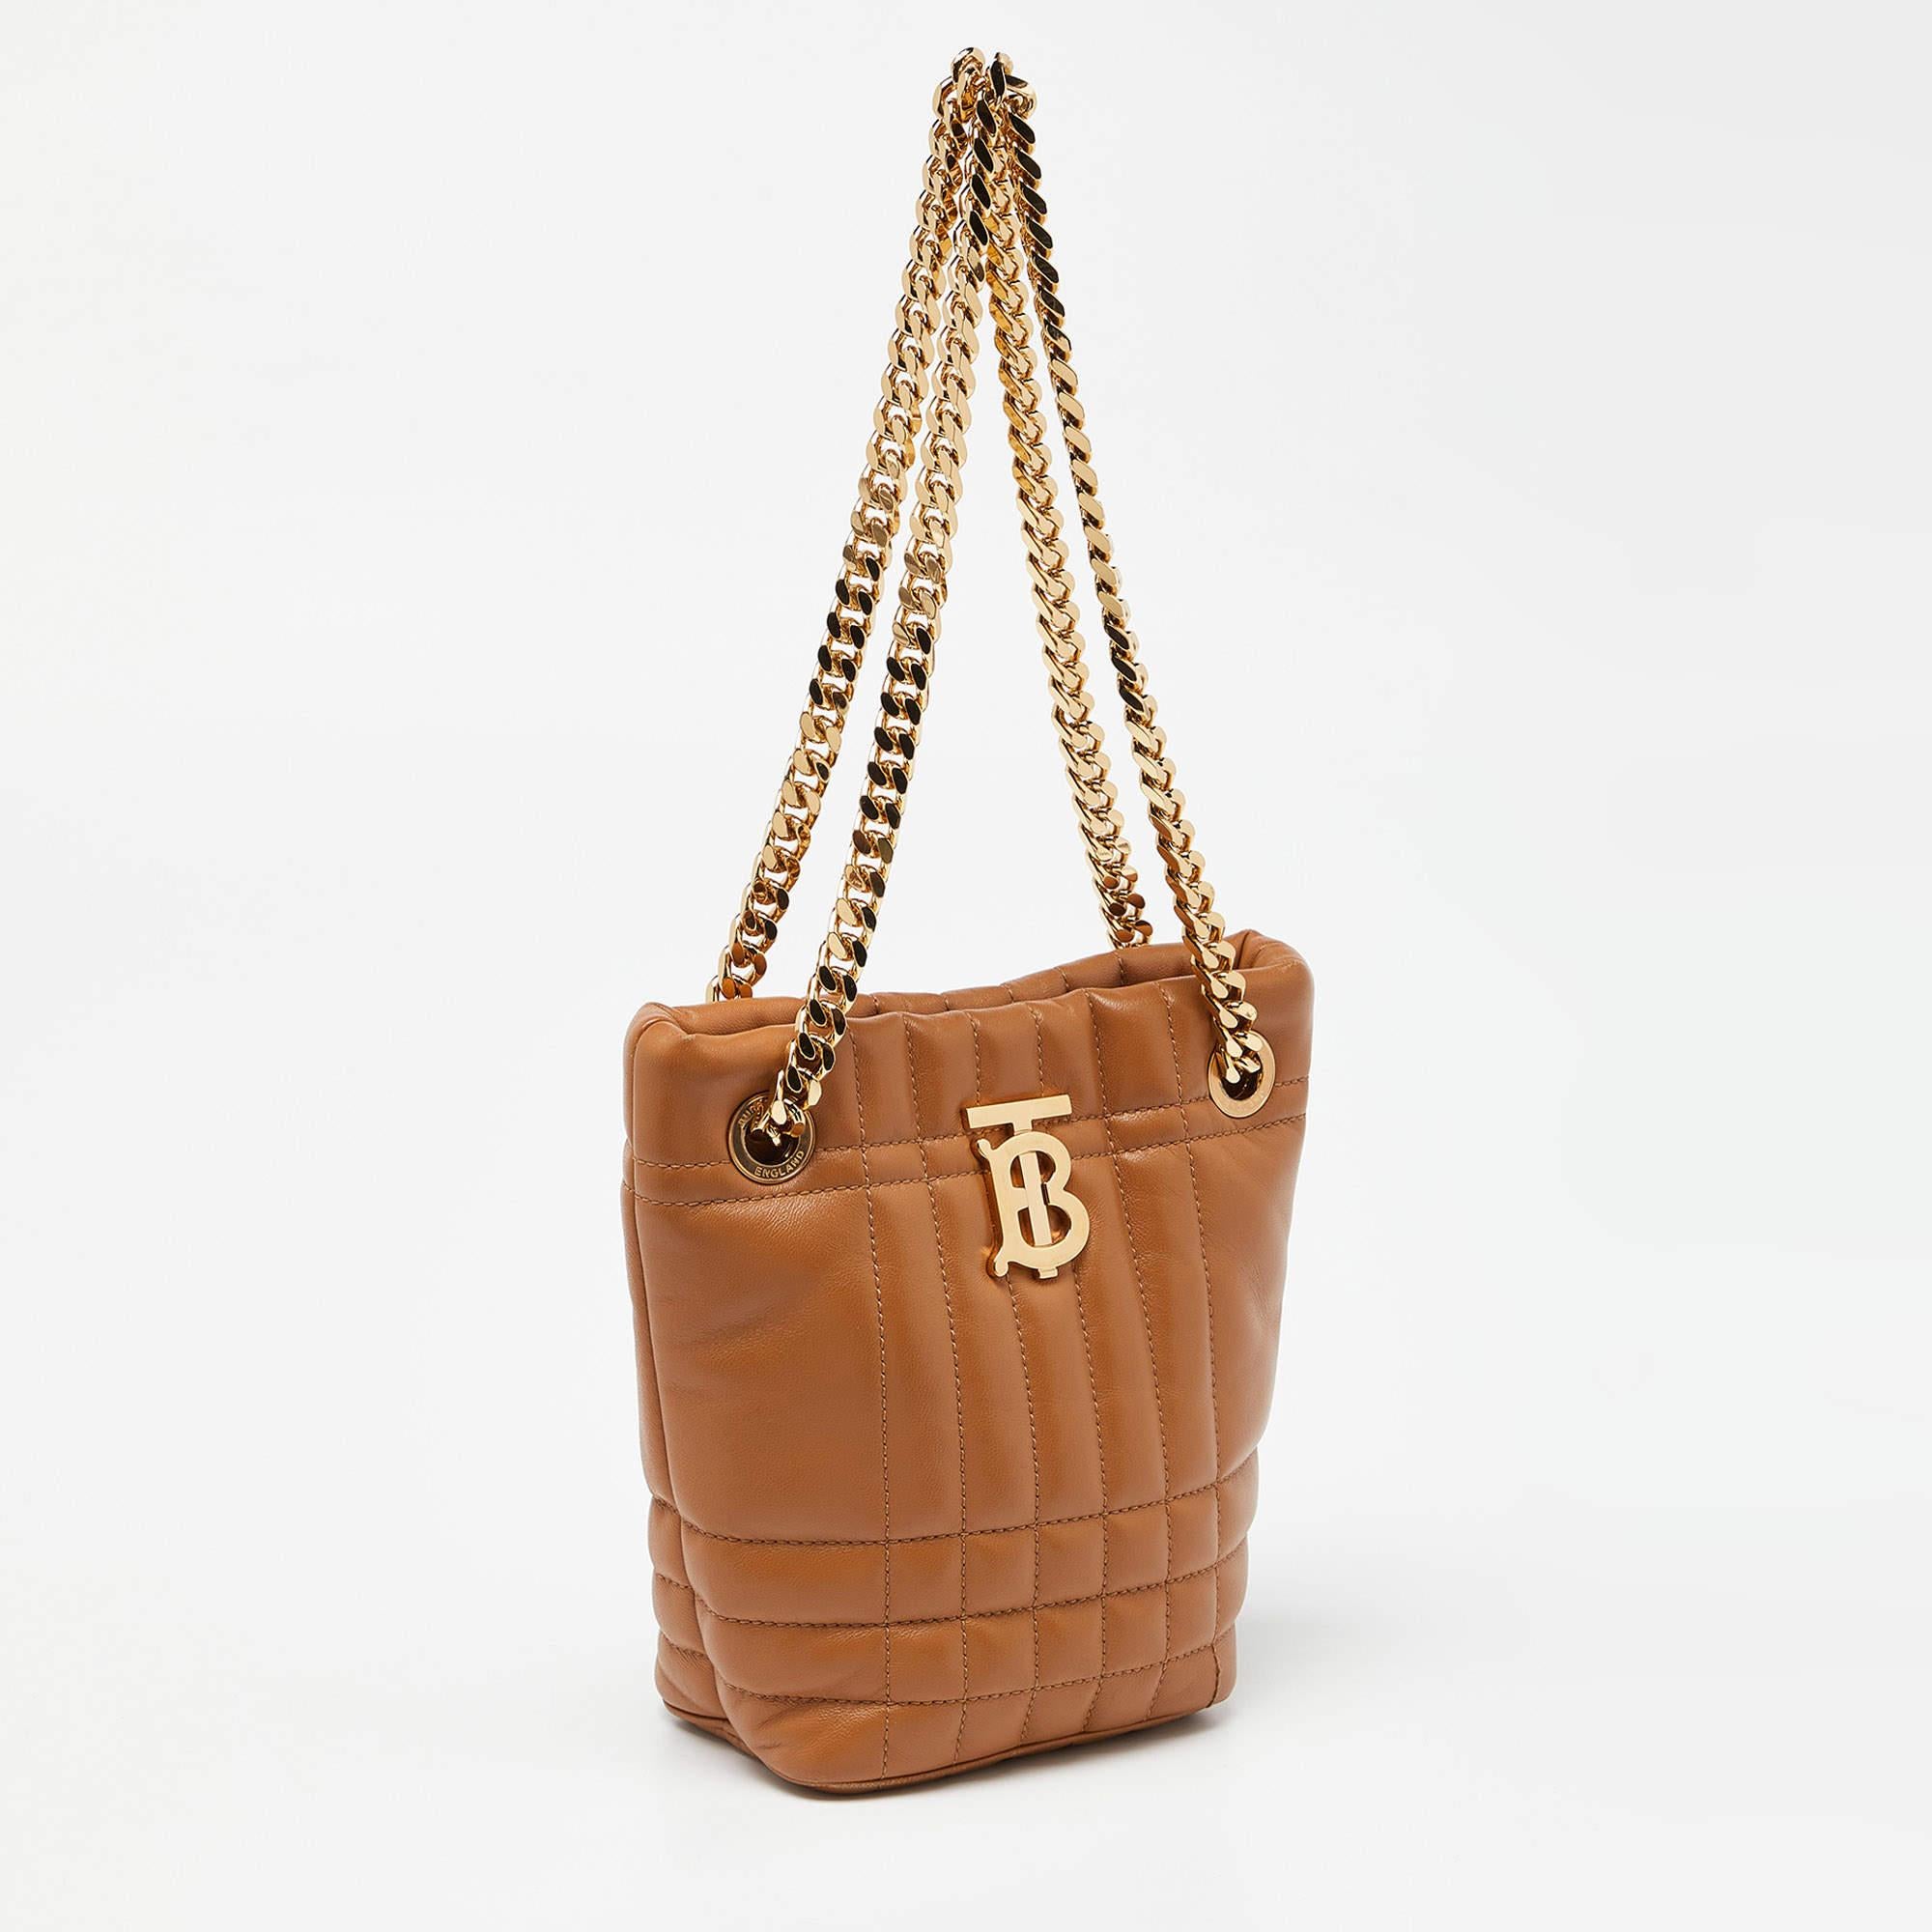 Burberry Brown Leather Micro Lola Shoulder Bag 5